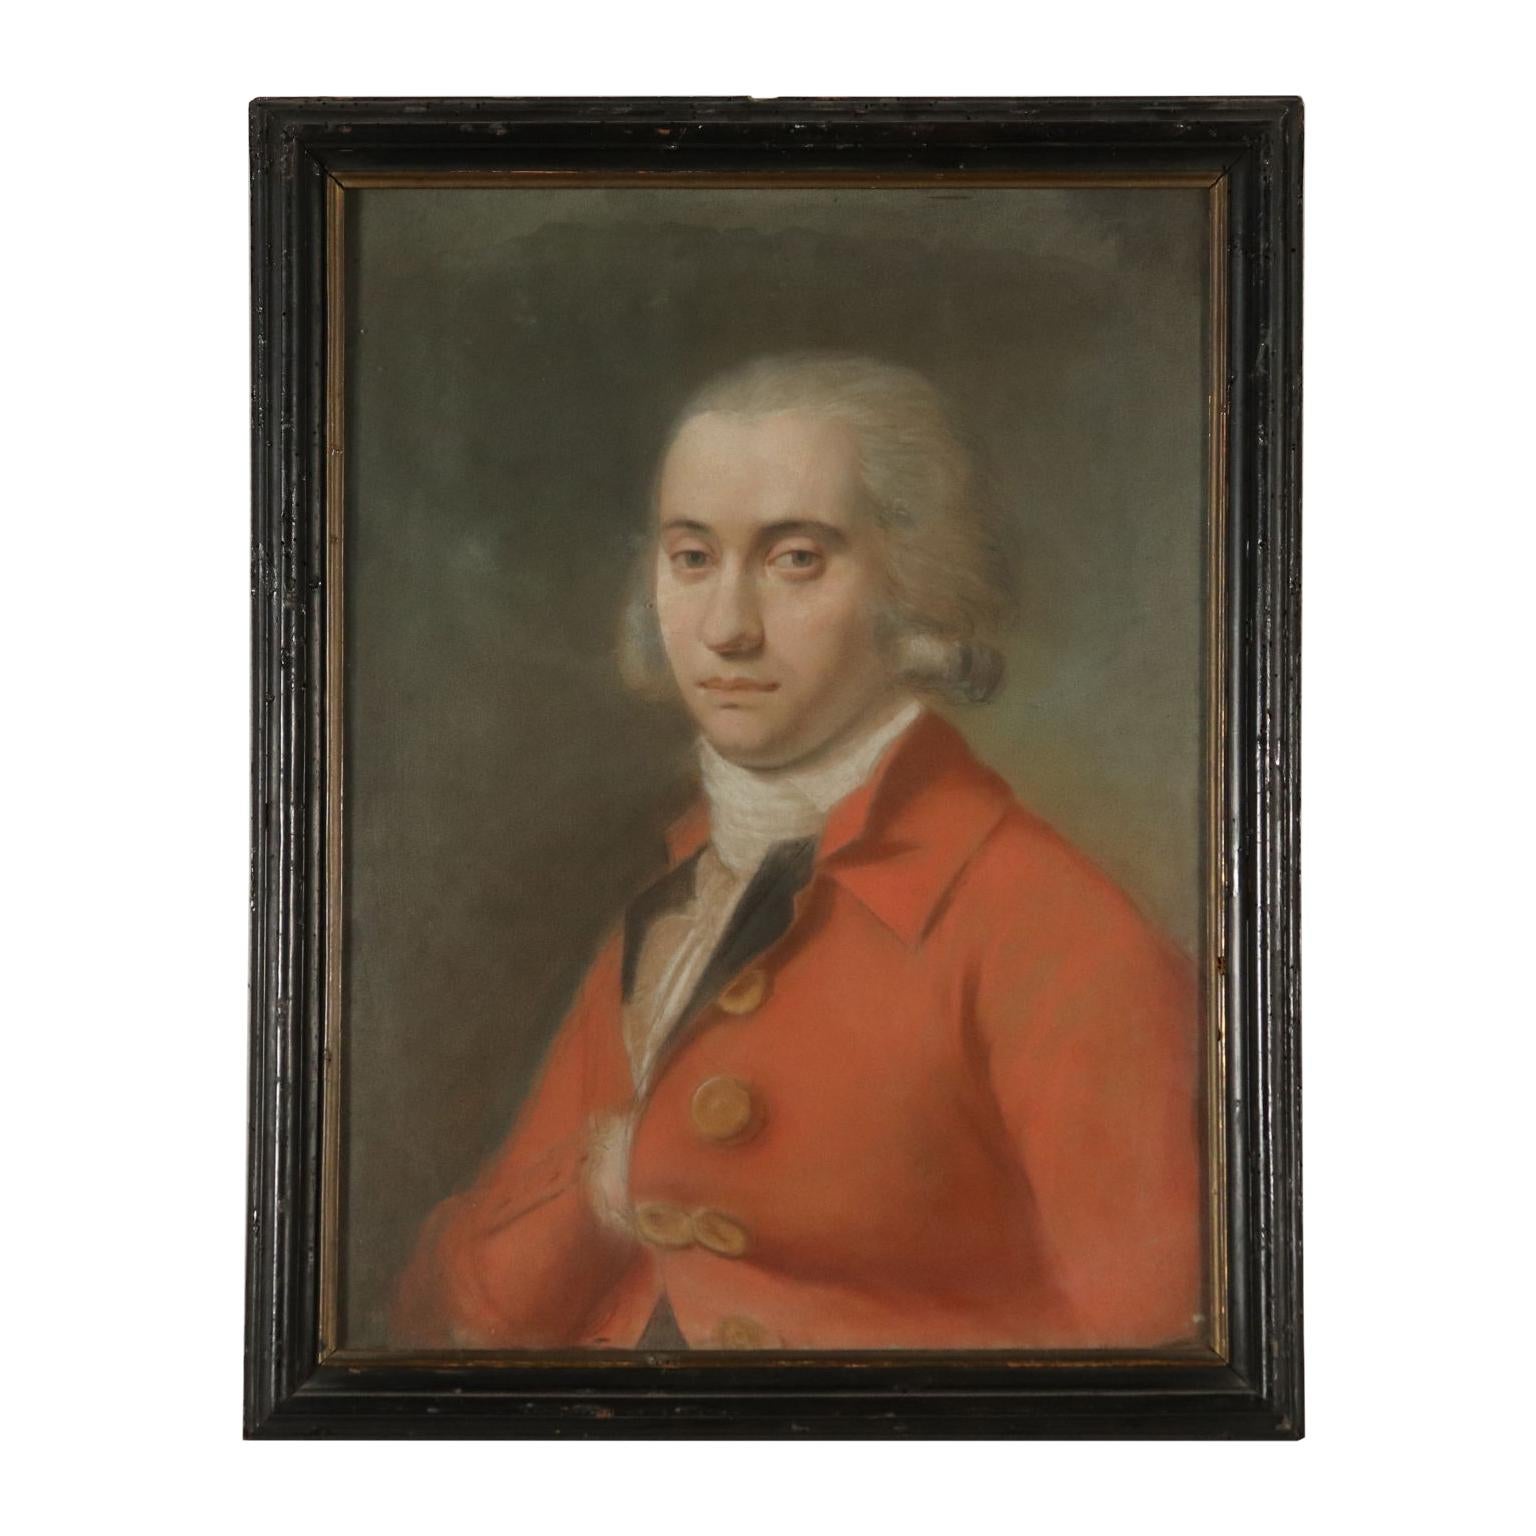 Unknown Portrait Painting - Portrait of Young Man Pastel on Paper Second Half of 1700s, Italian Painting 